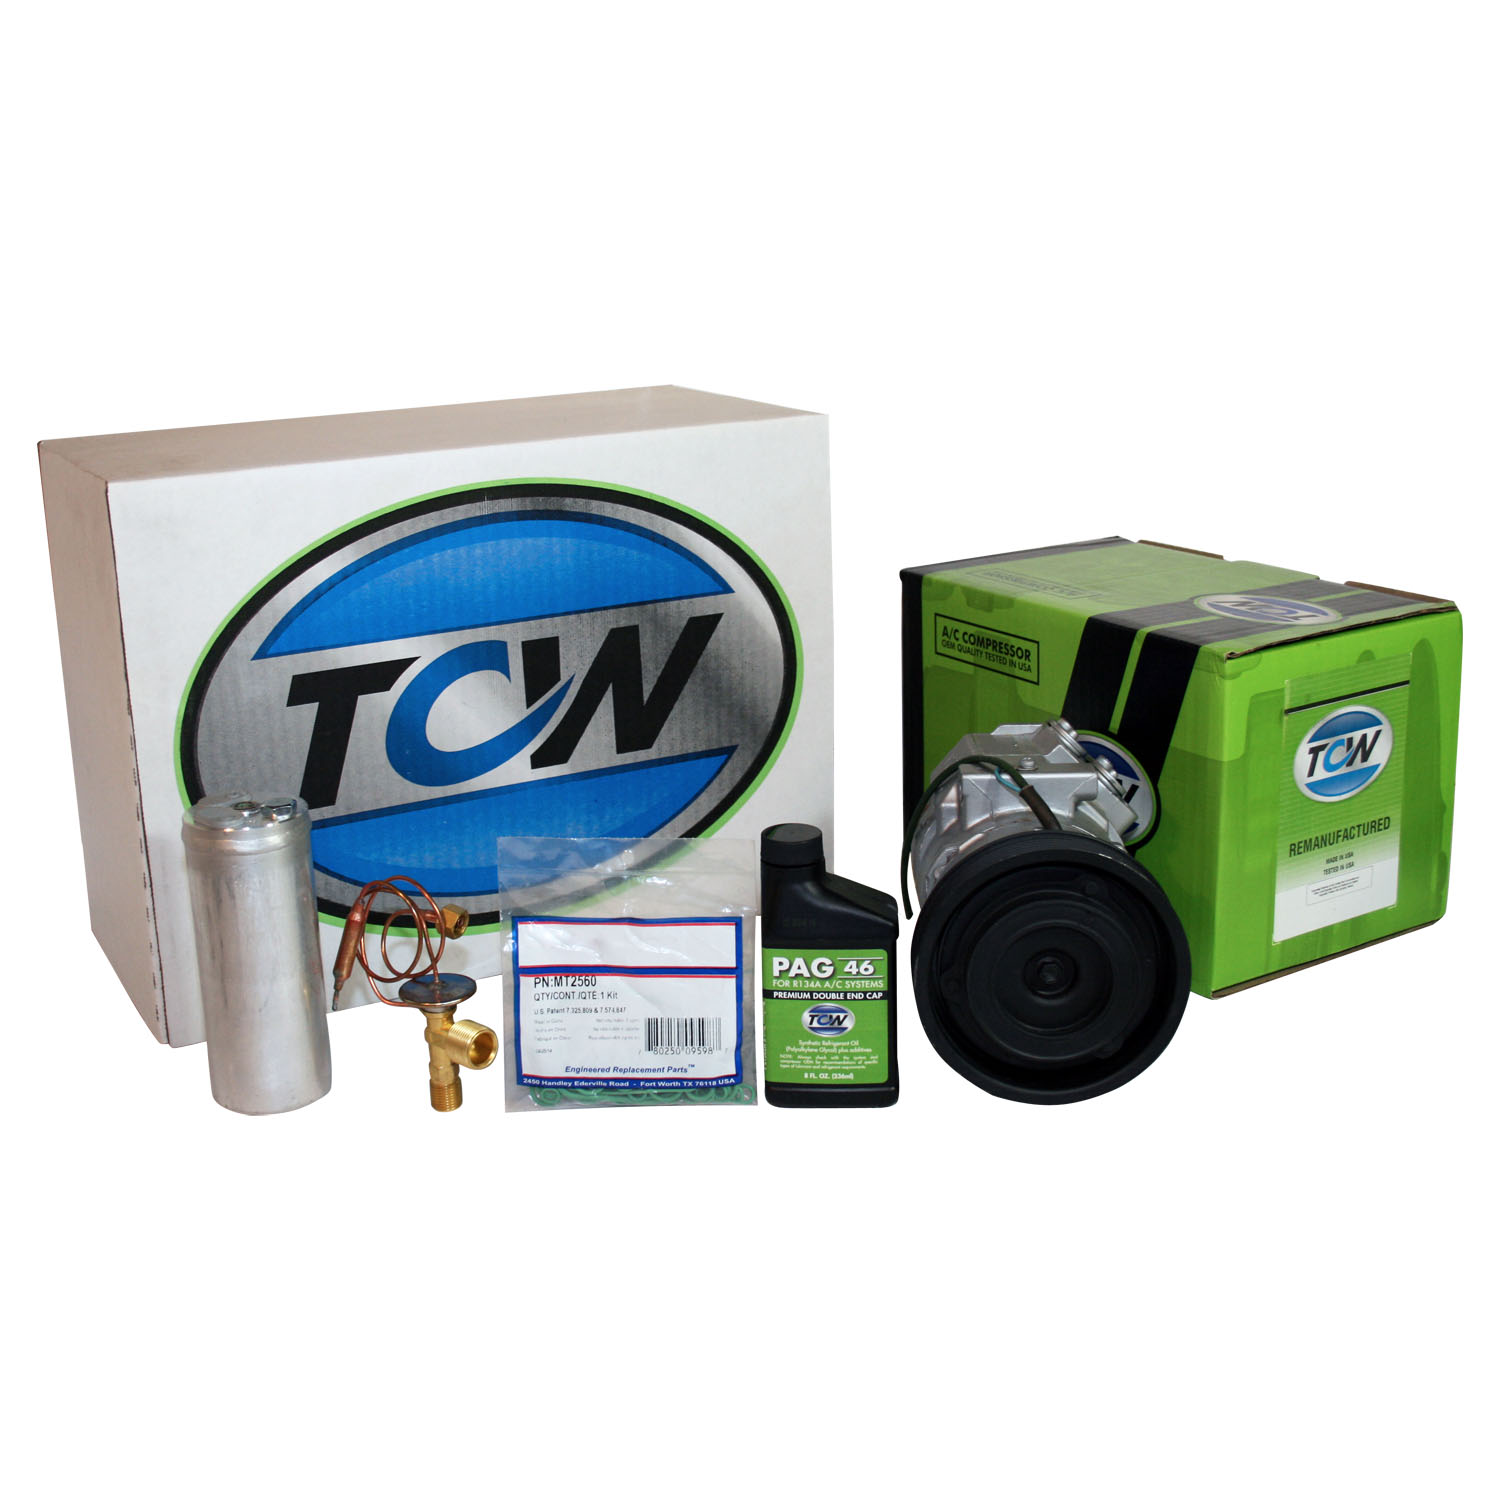 TCW Vehicle A/C Kit K1000447R Remanufactured Product Image field_60b6a13a6e67c